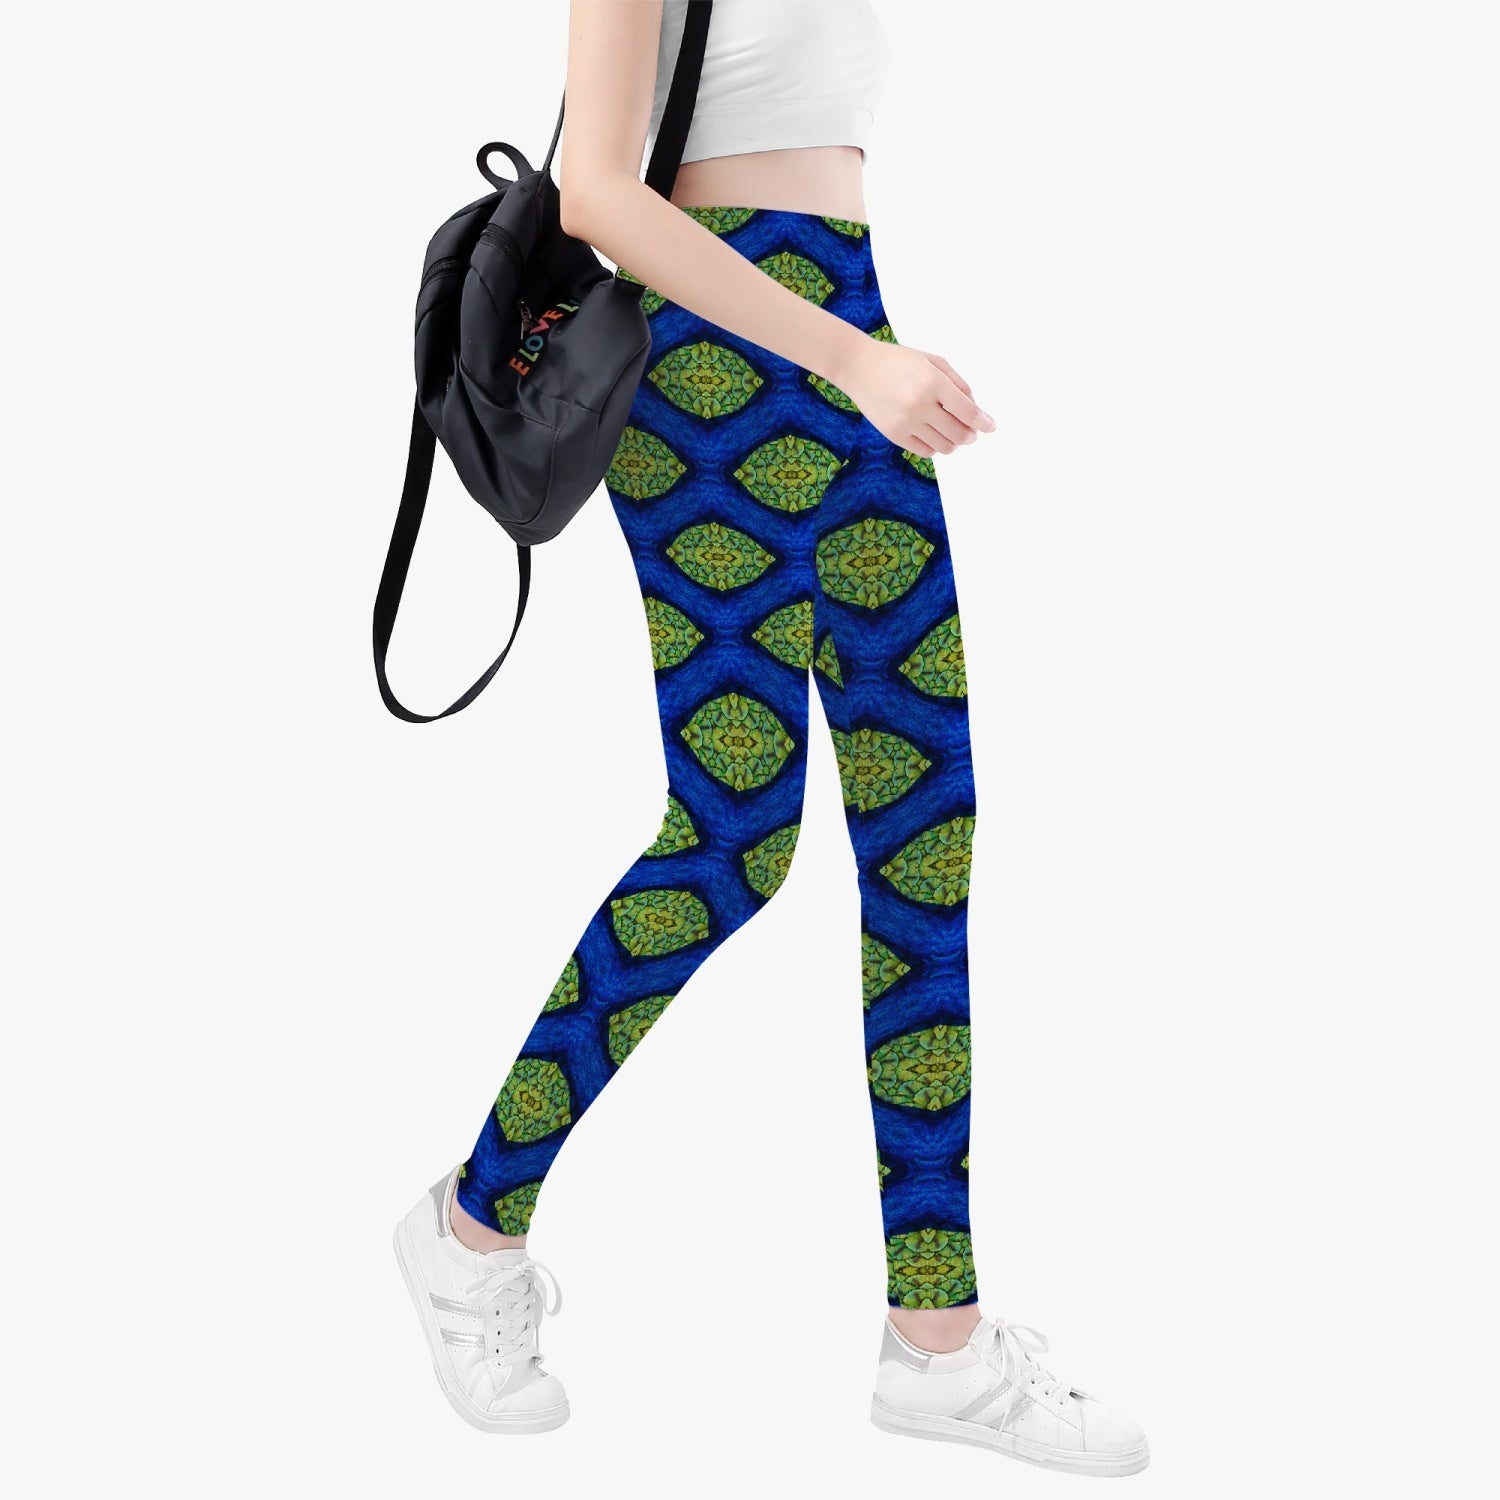 The Heart and Brain Connection Yoga Pants, by Sensus Studio Design